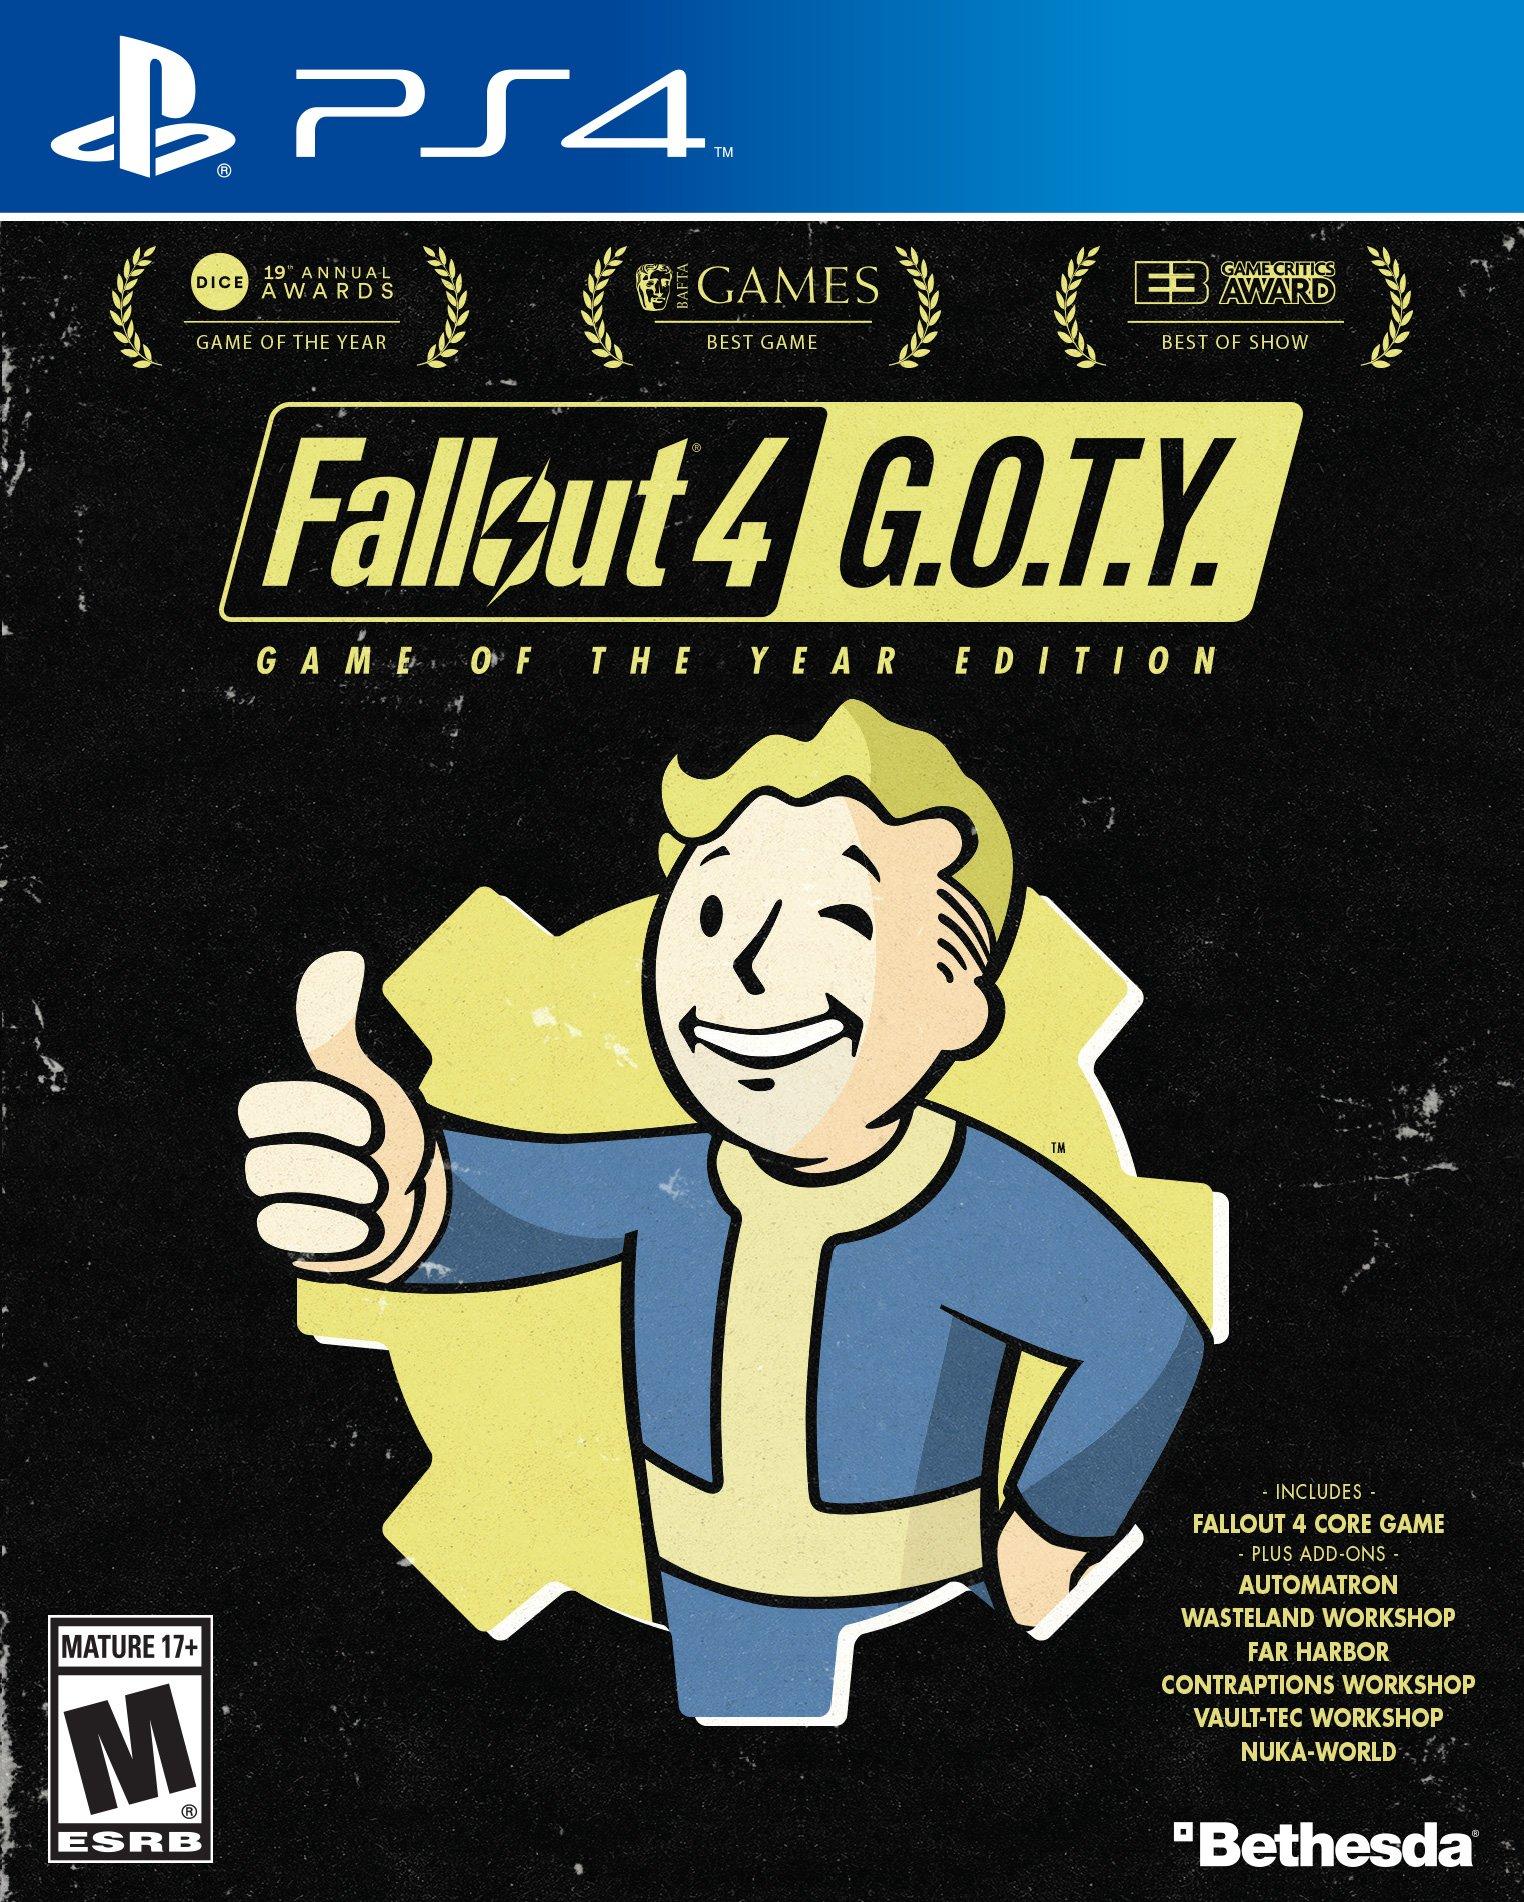 fallout 3 game of the year edition xbox one